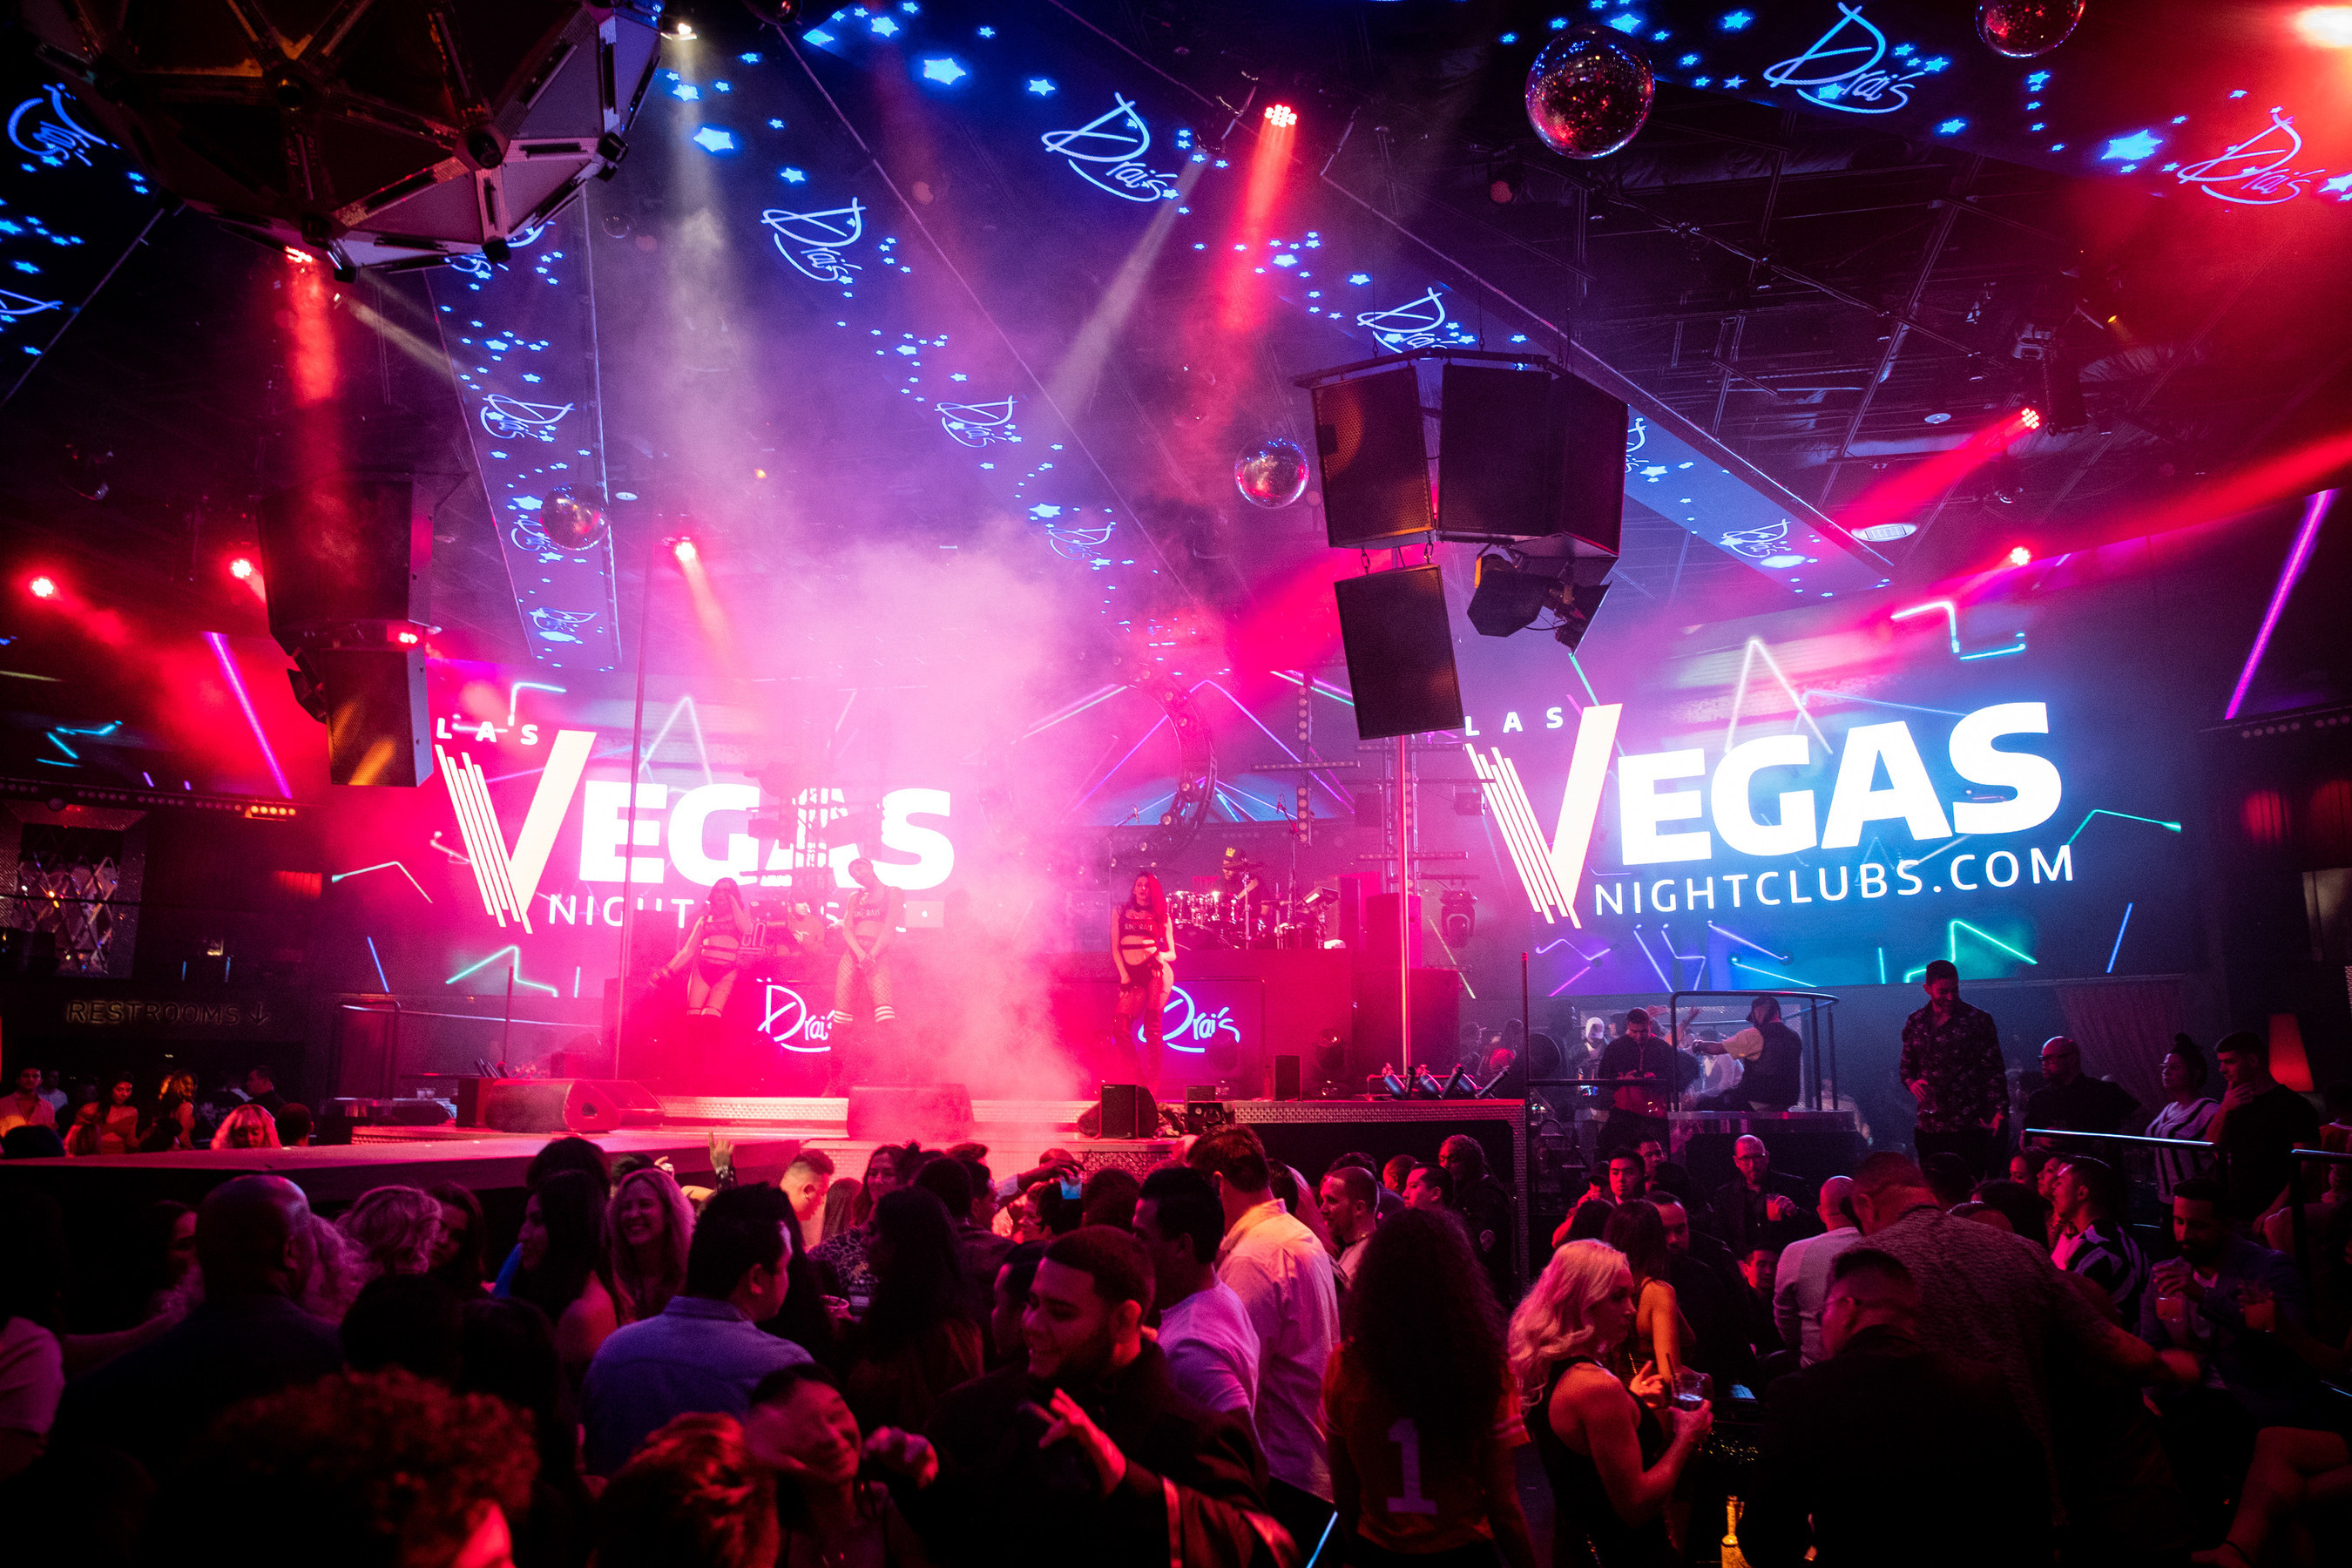 The Most Visited Guide to Vegas Nightlife Changes Name to LasVegasNightclubs.com